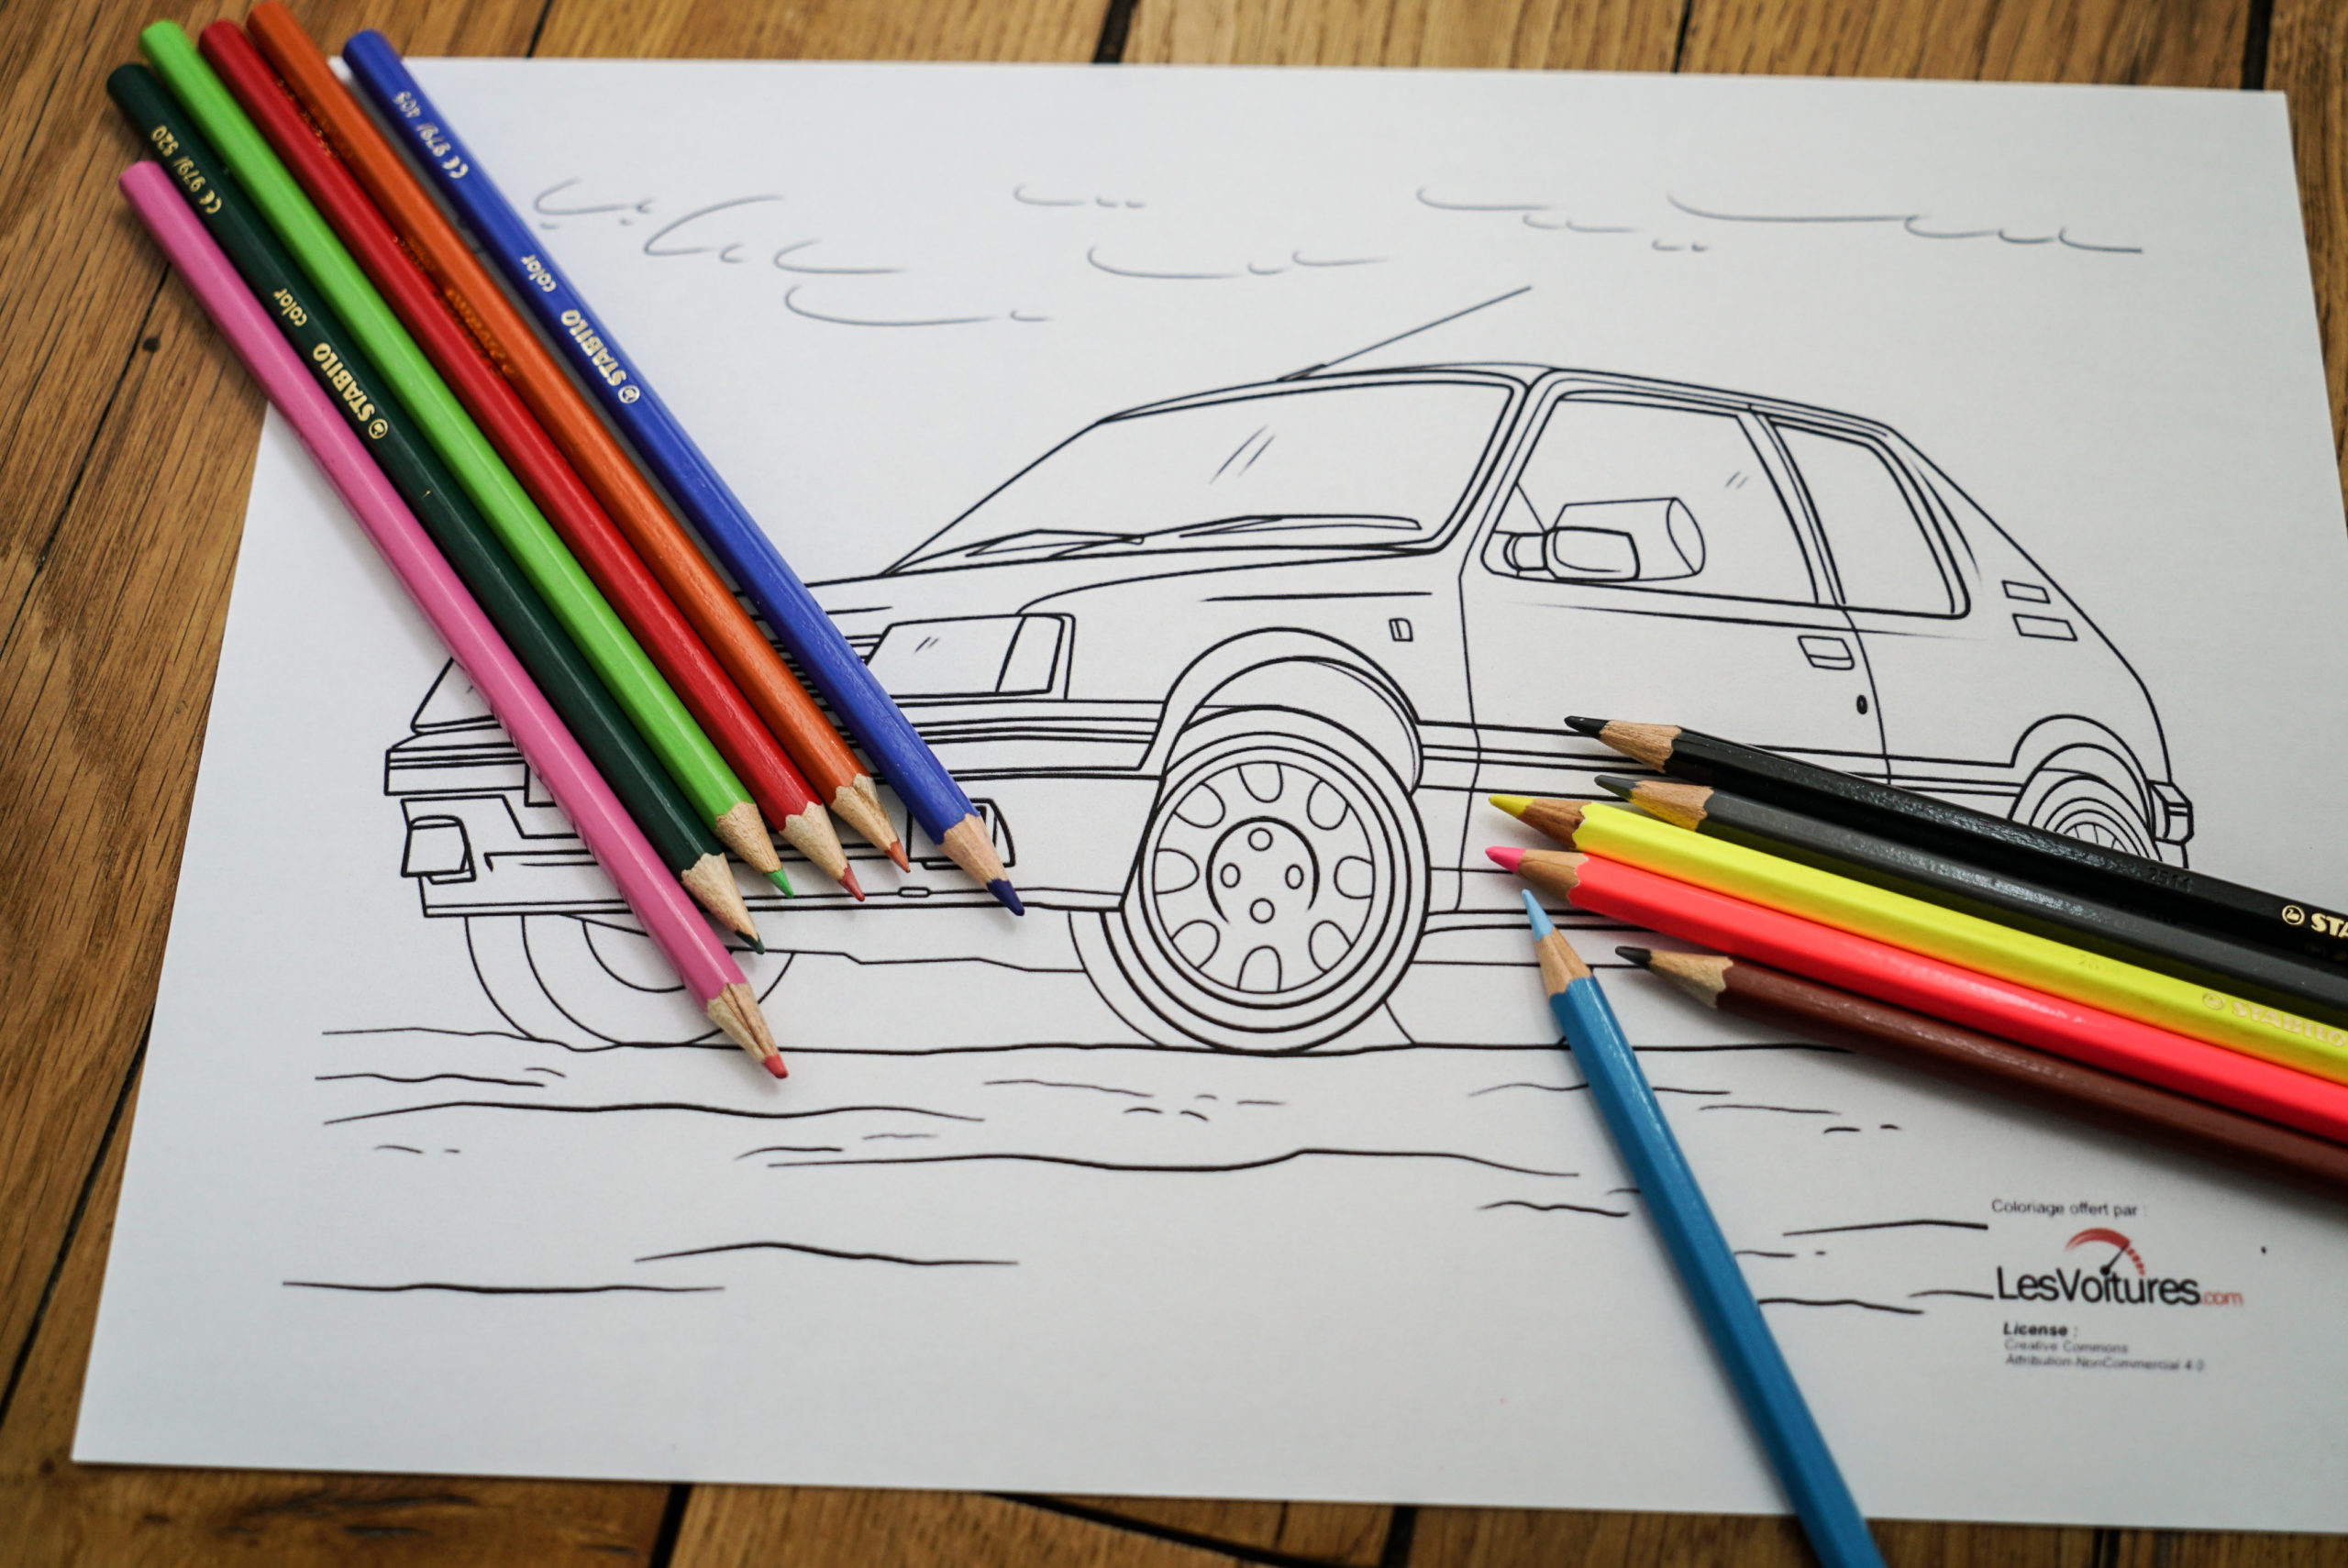 https://lesvoitures.fr/wp-content/uploads/2020/03/coloriage-voiture-4-scaled.jpg